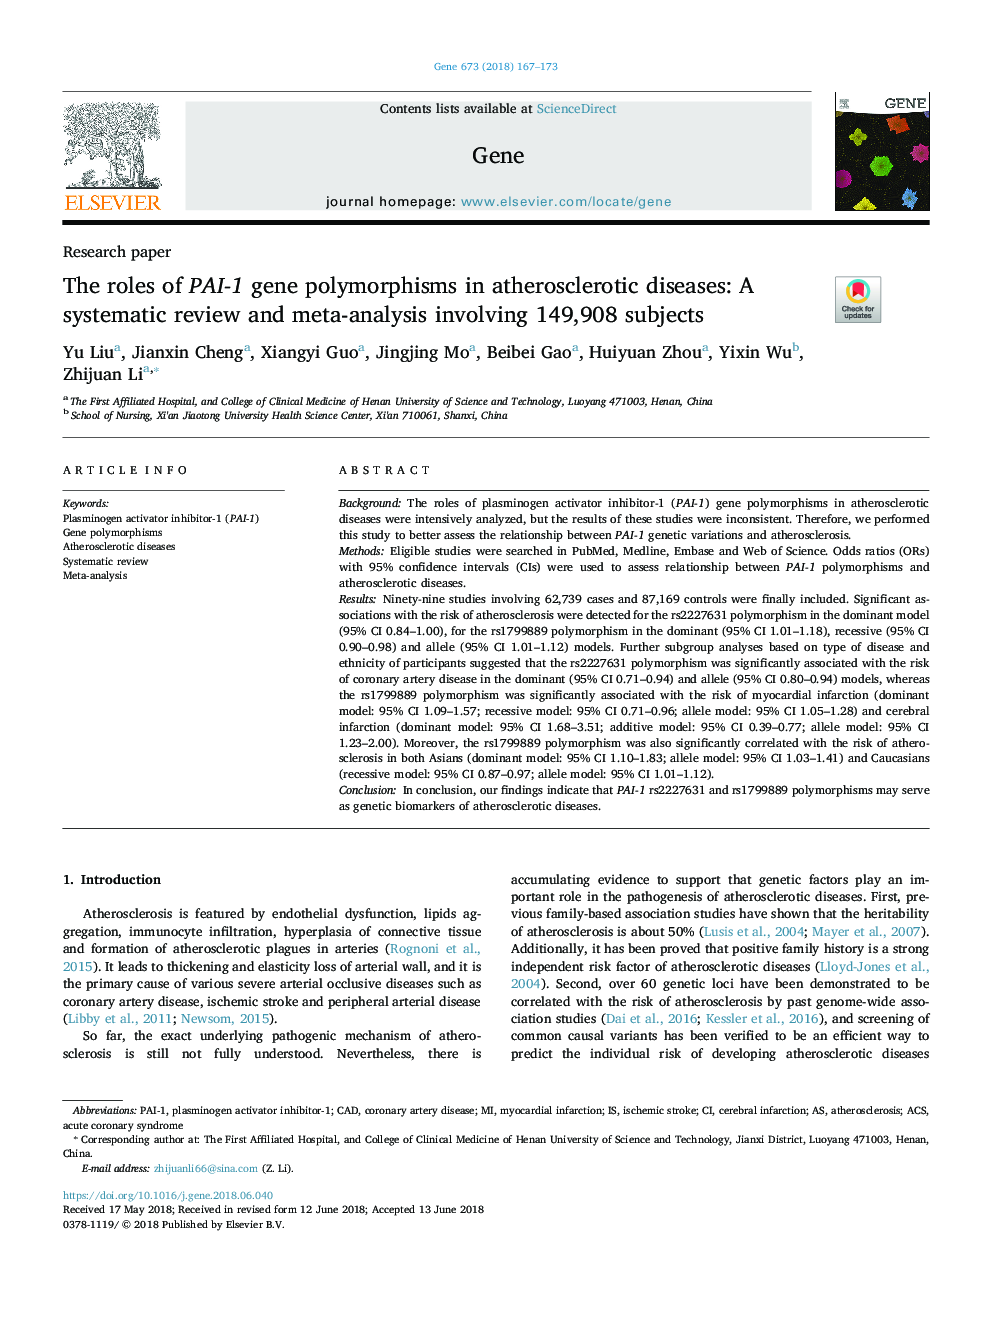 The roles of PAI-1 gene polymorphisms in atherosclerotic diseases: A systematic review and meta-analysis involving 149,908 subjects